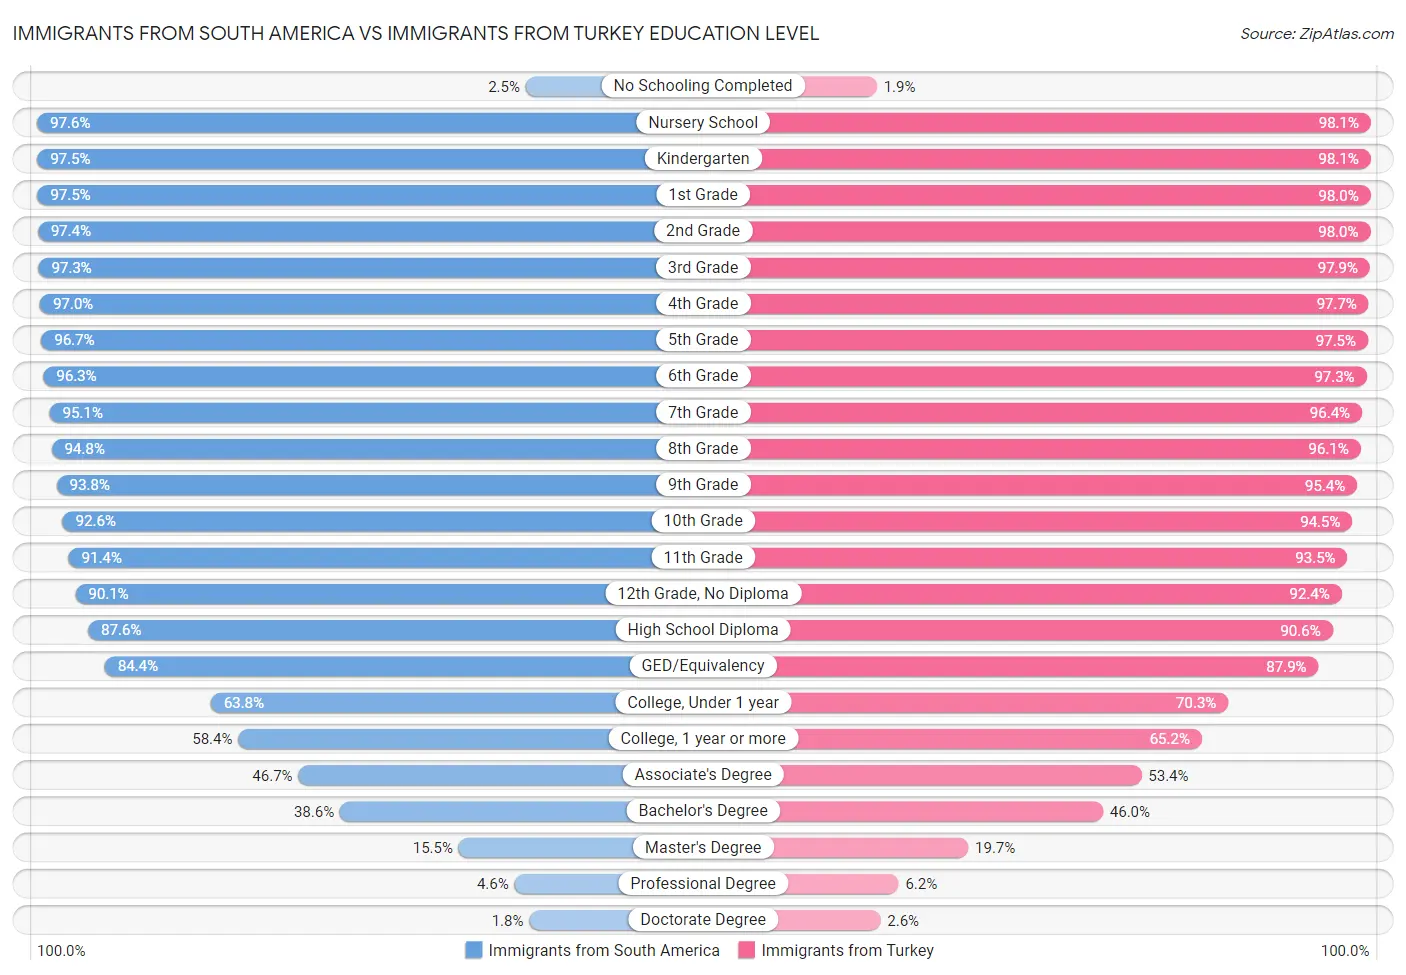 Immigrants from South America vs Immigrants from Turkey Education Level